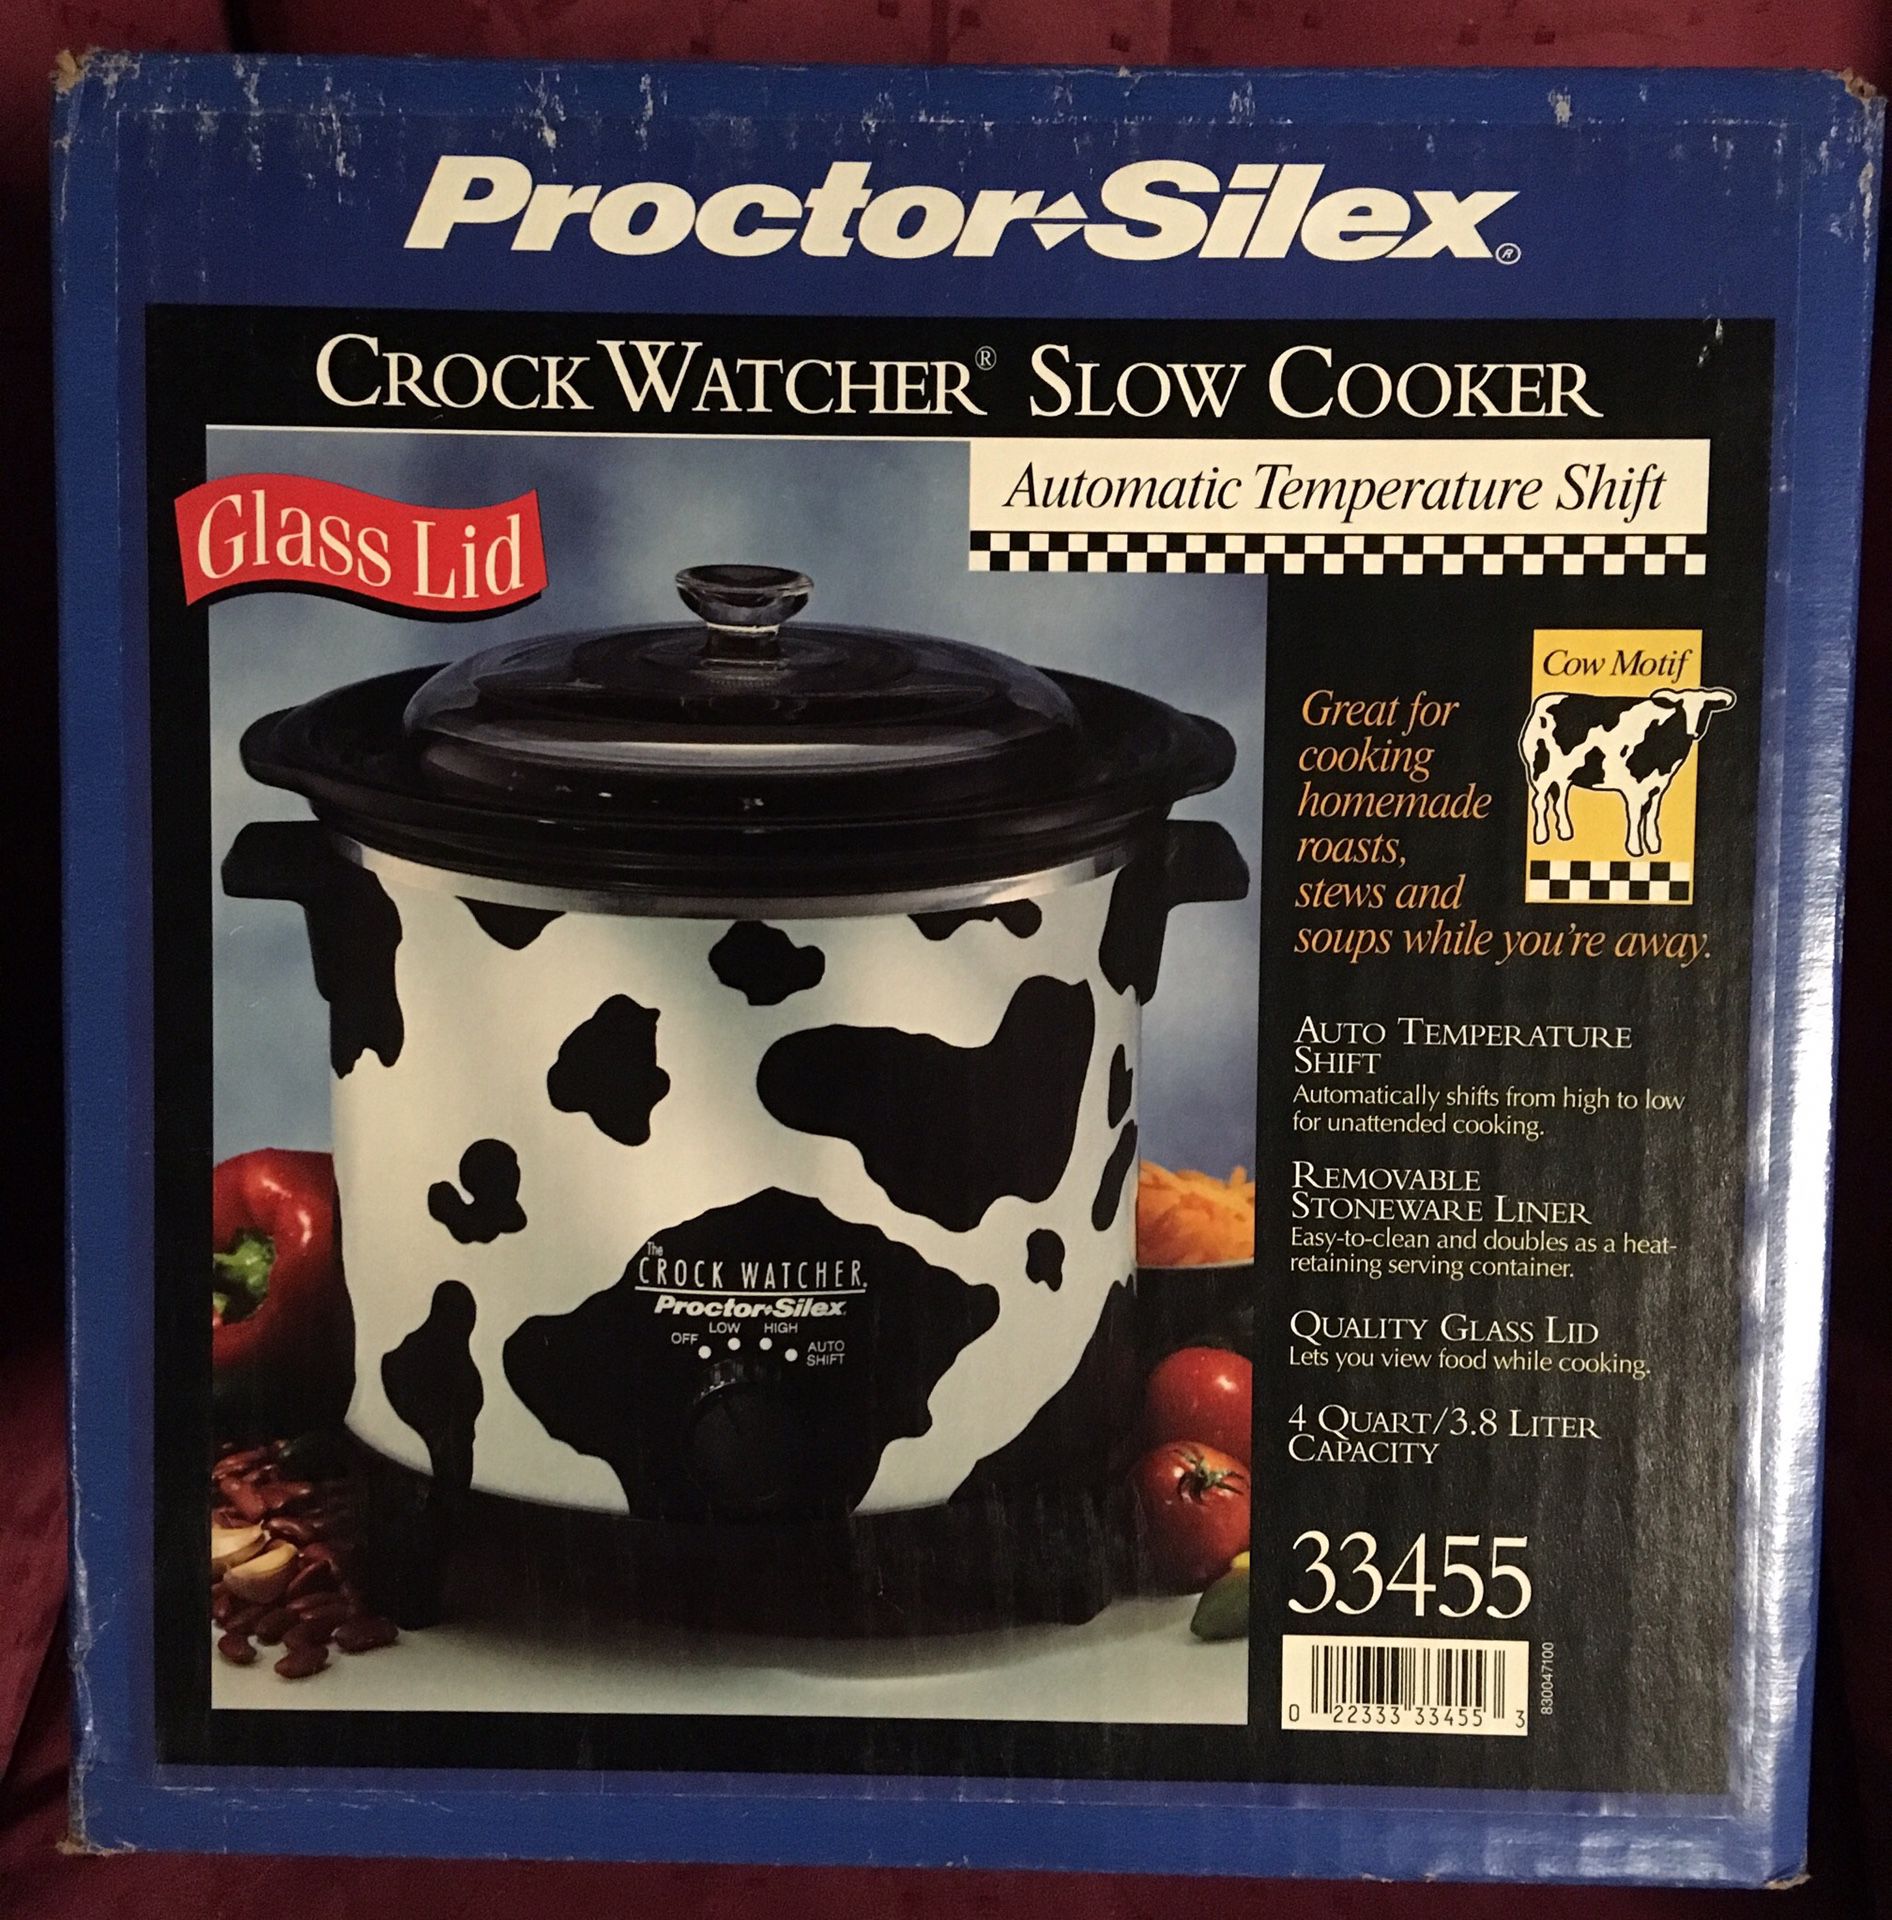 Large lot of BRAND NEW cow themed kitchen appliances and accessories - look at all the pictures and description of items